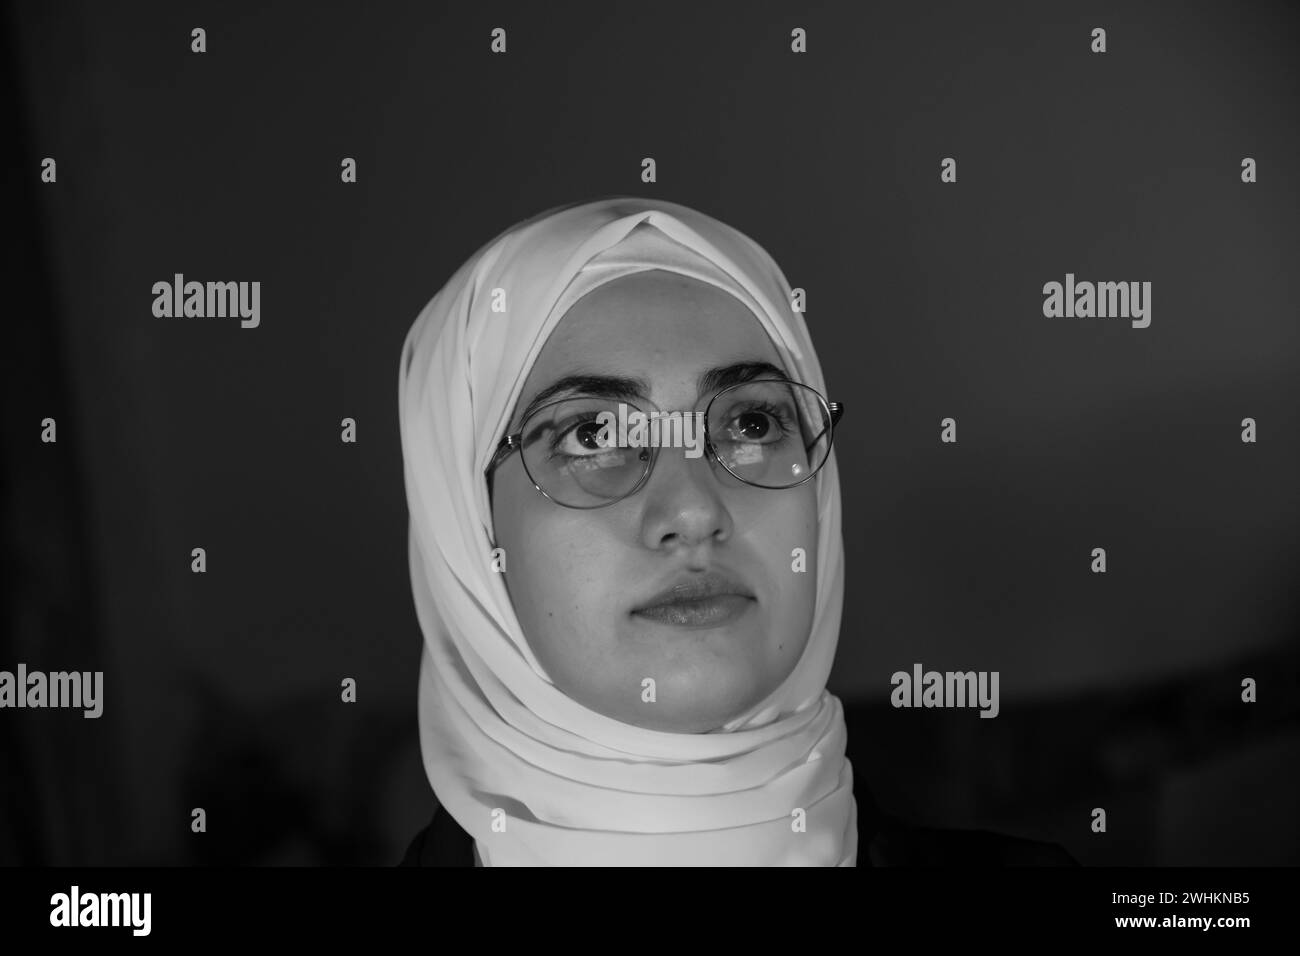 Arabic muslim girl looking serious with black and white color Stock Photo